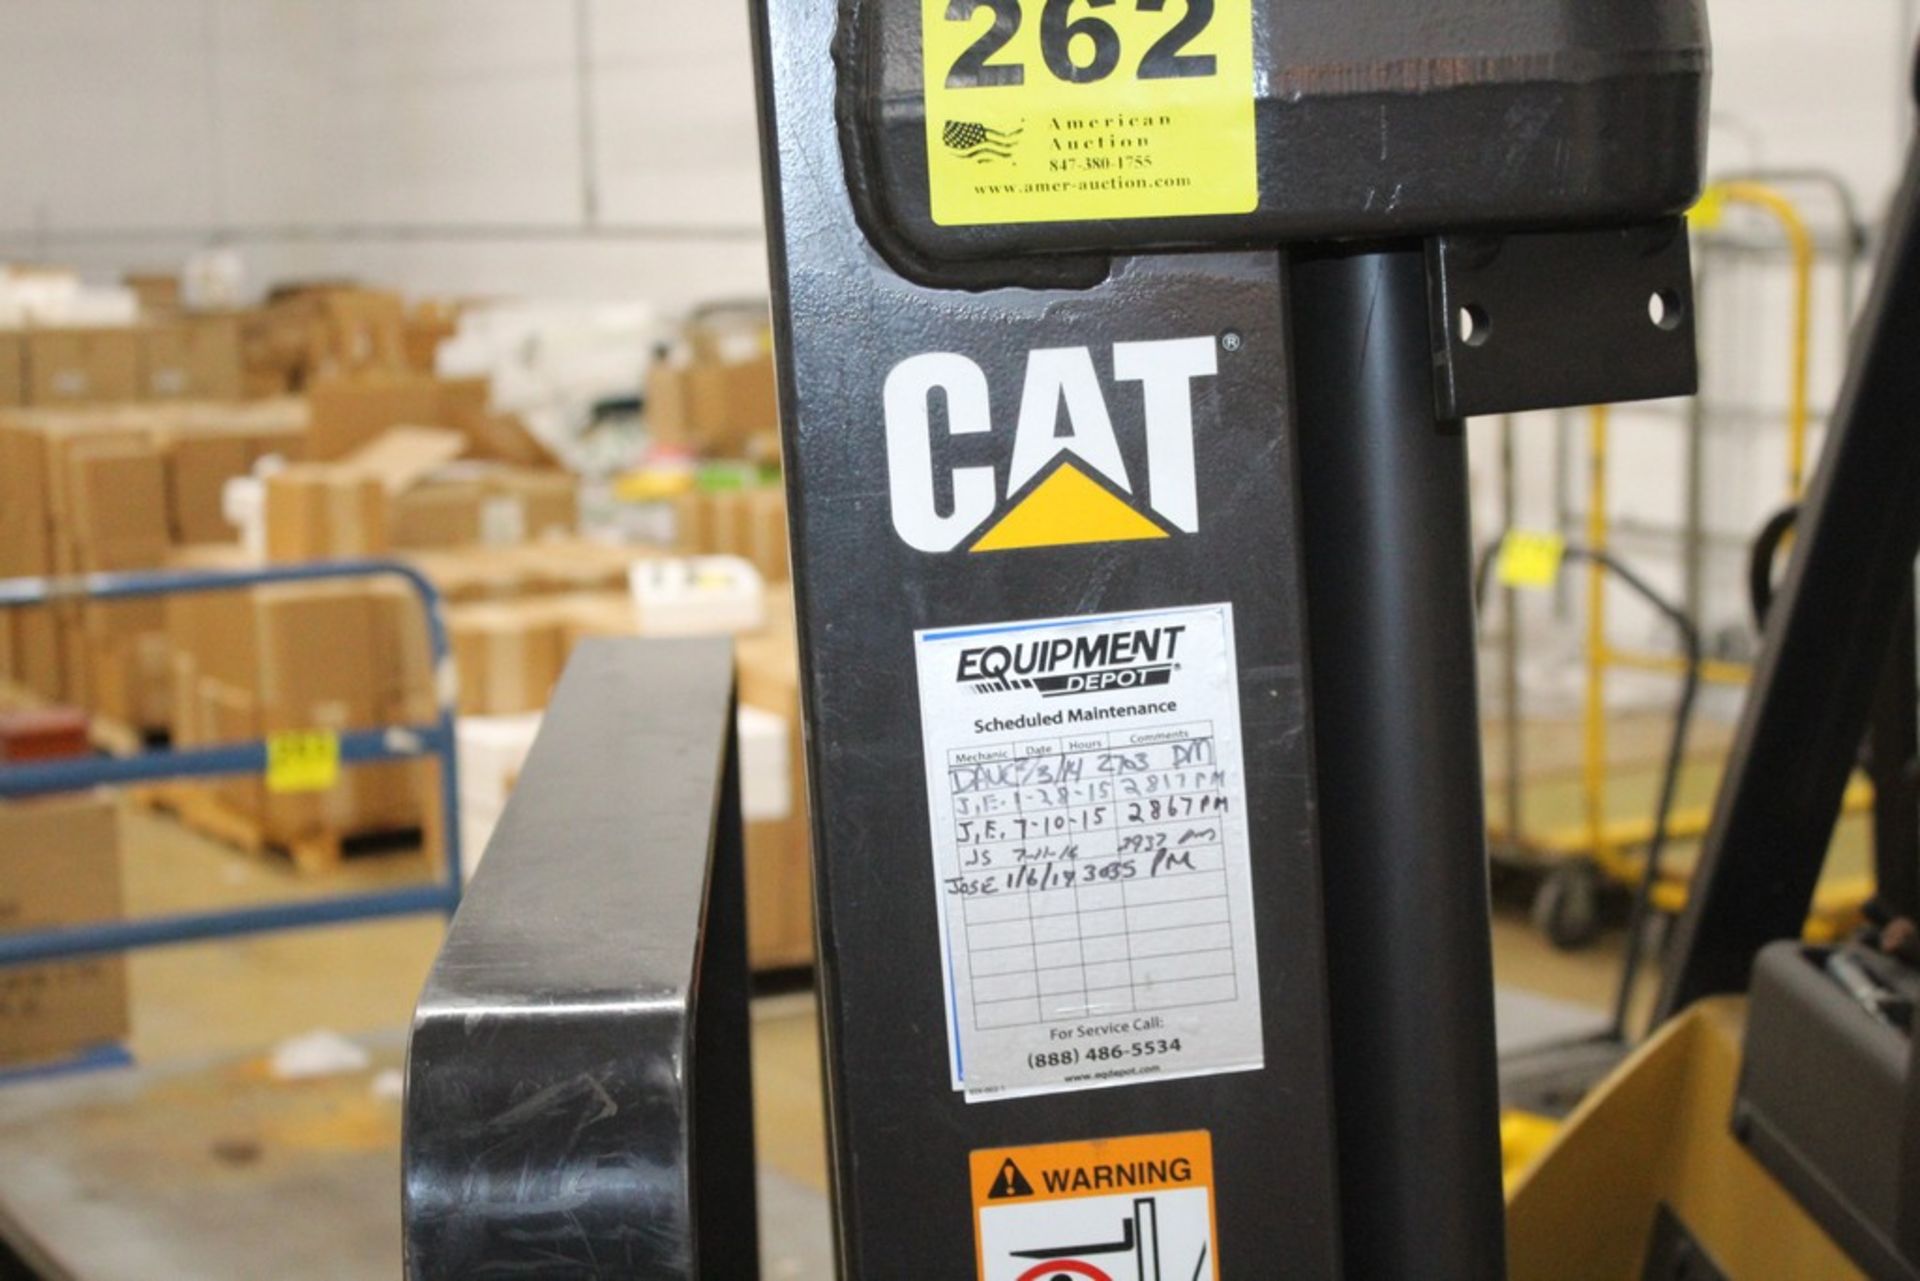 CATERPILLAR MODEL E5000 ELECTRIC FORKLIFT, 3,198 HOURS ON METER, LIFTING CAP. 4,500 LBS., 188" MAX - Image 2 of 12